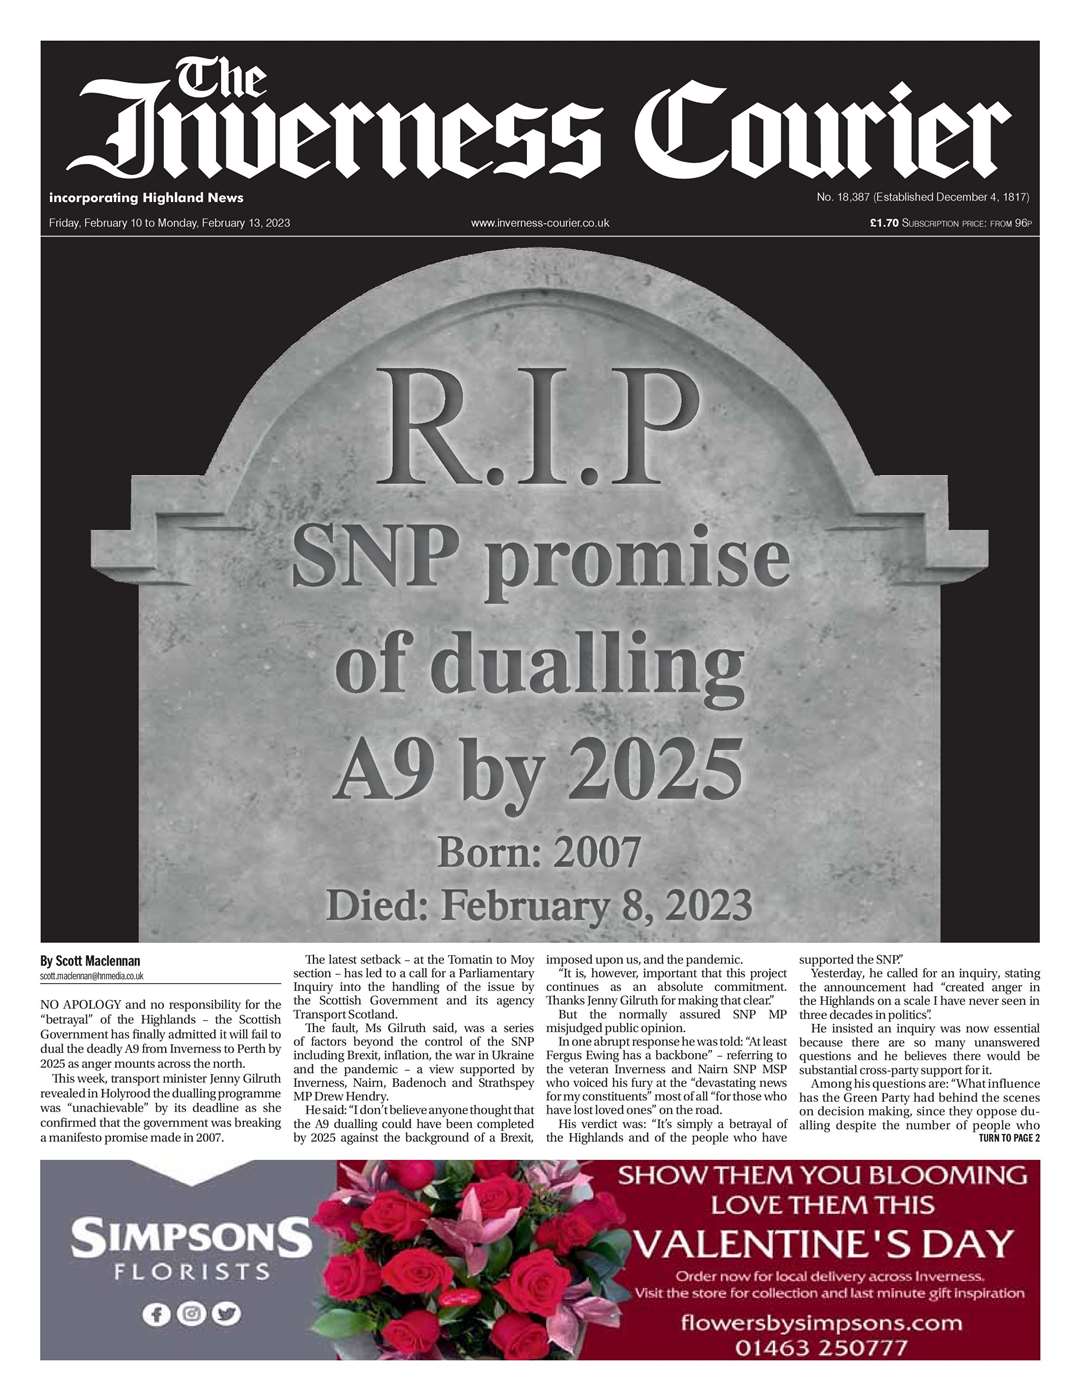 The Inverness Courier, February 10, front page.